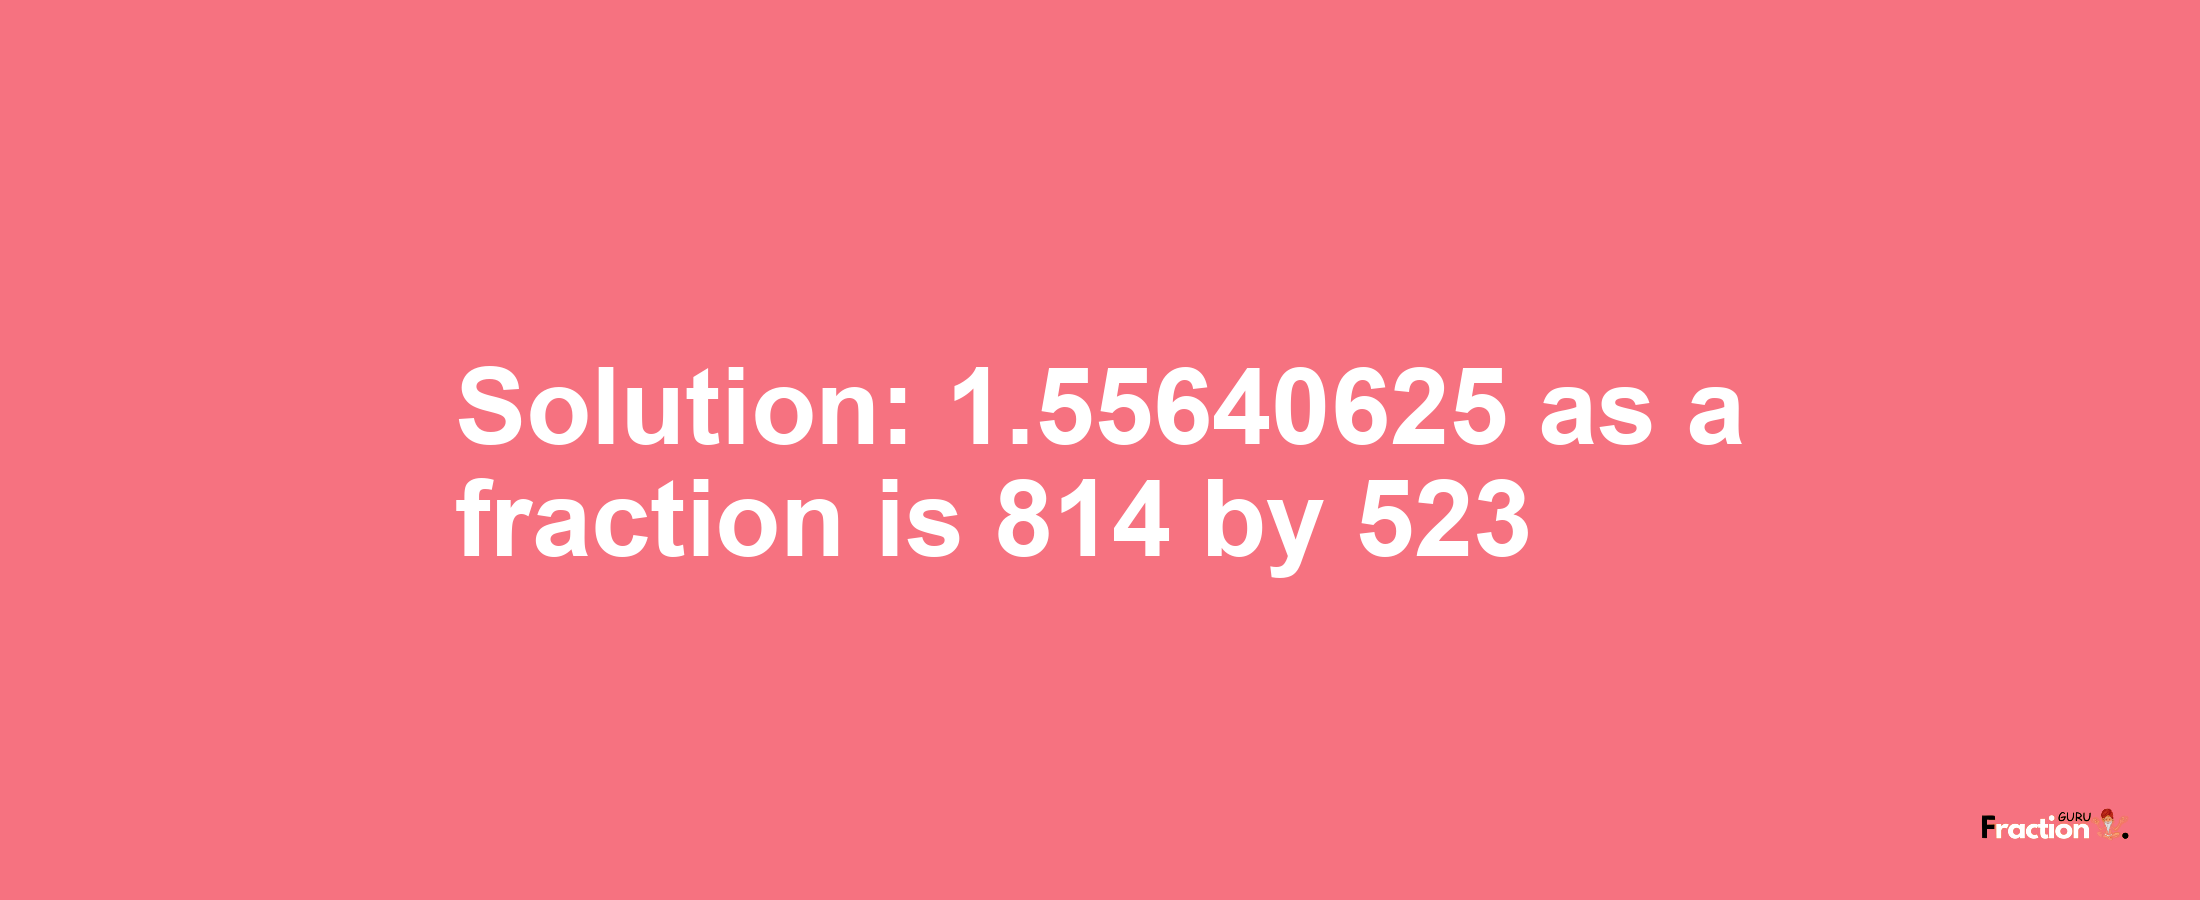 Solution:1.55640625 as a fraction is 814/523